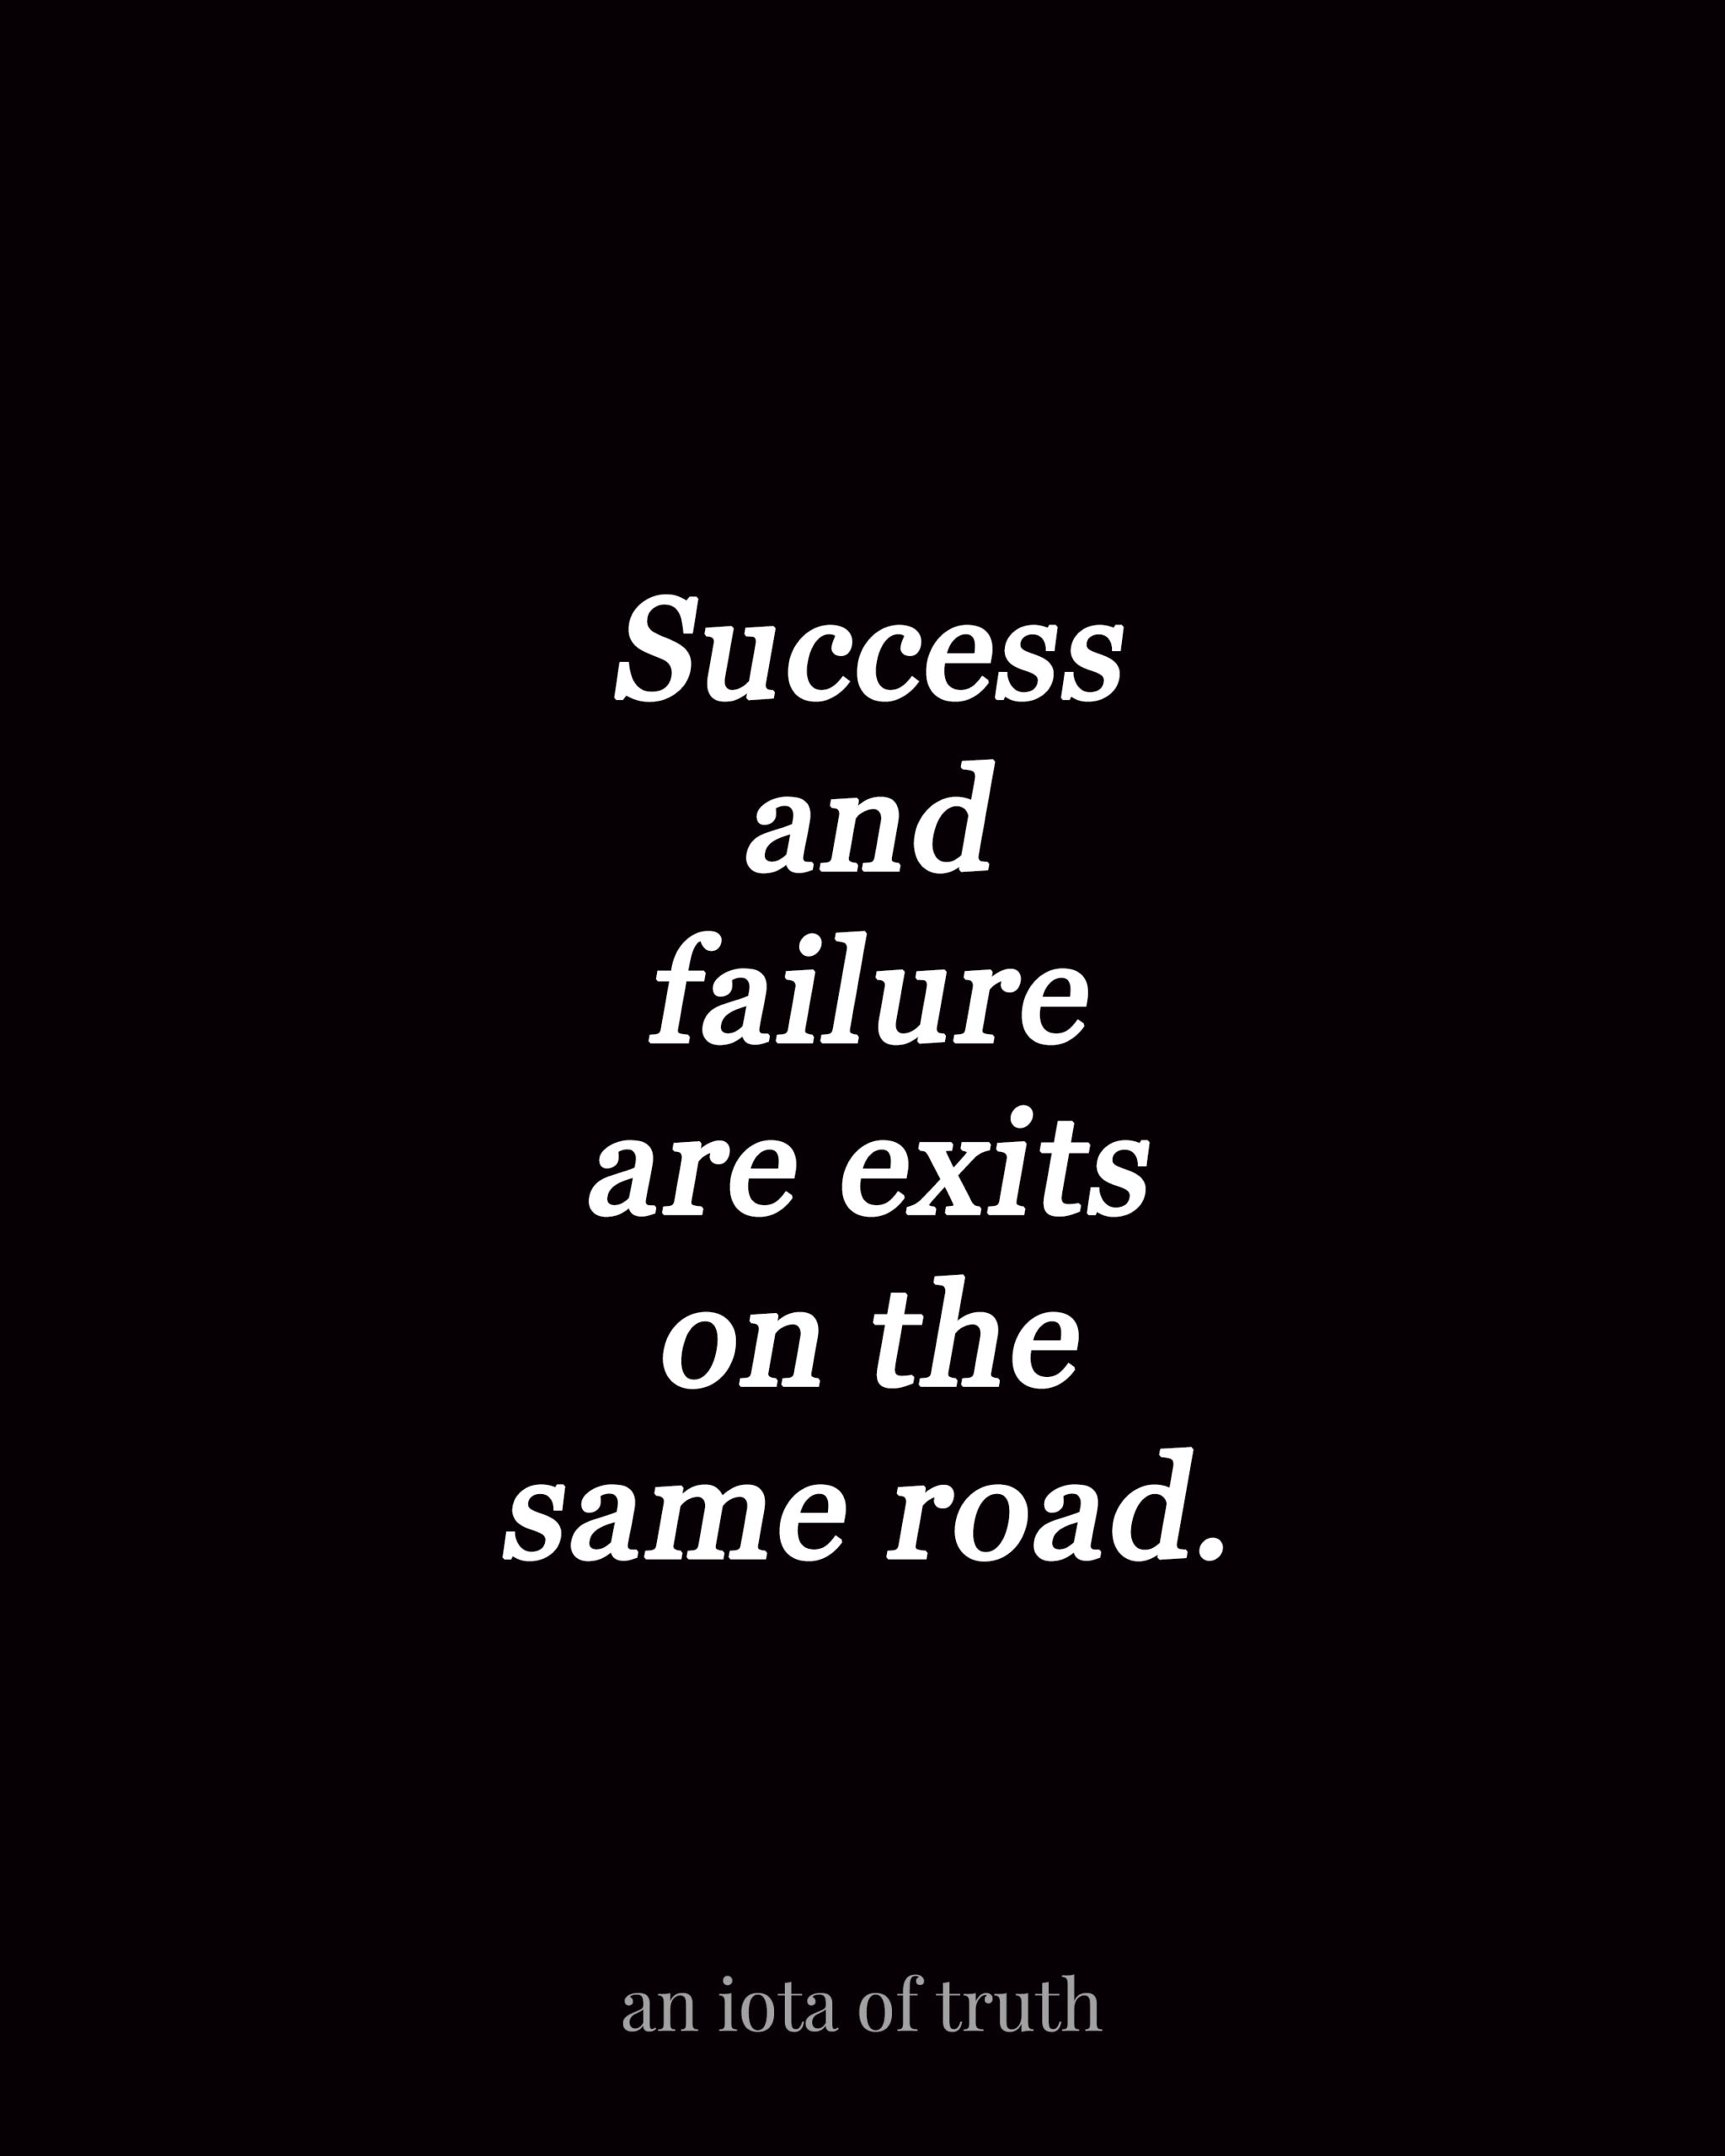 Success and failure are exits on the same road.